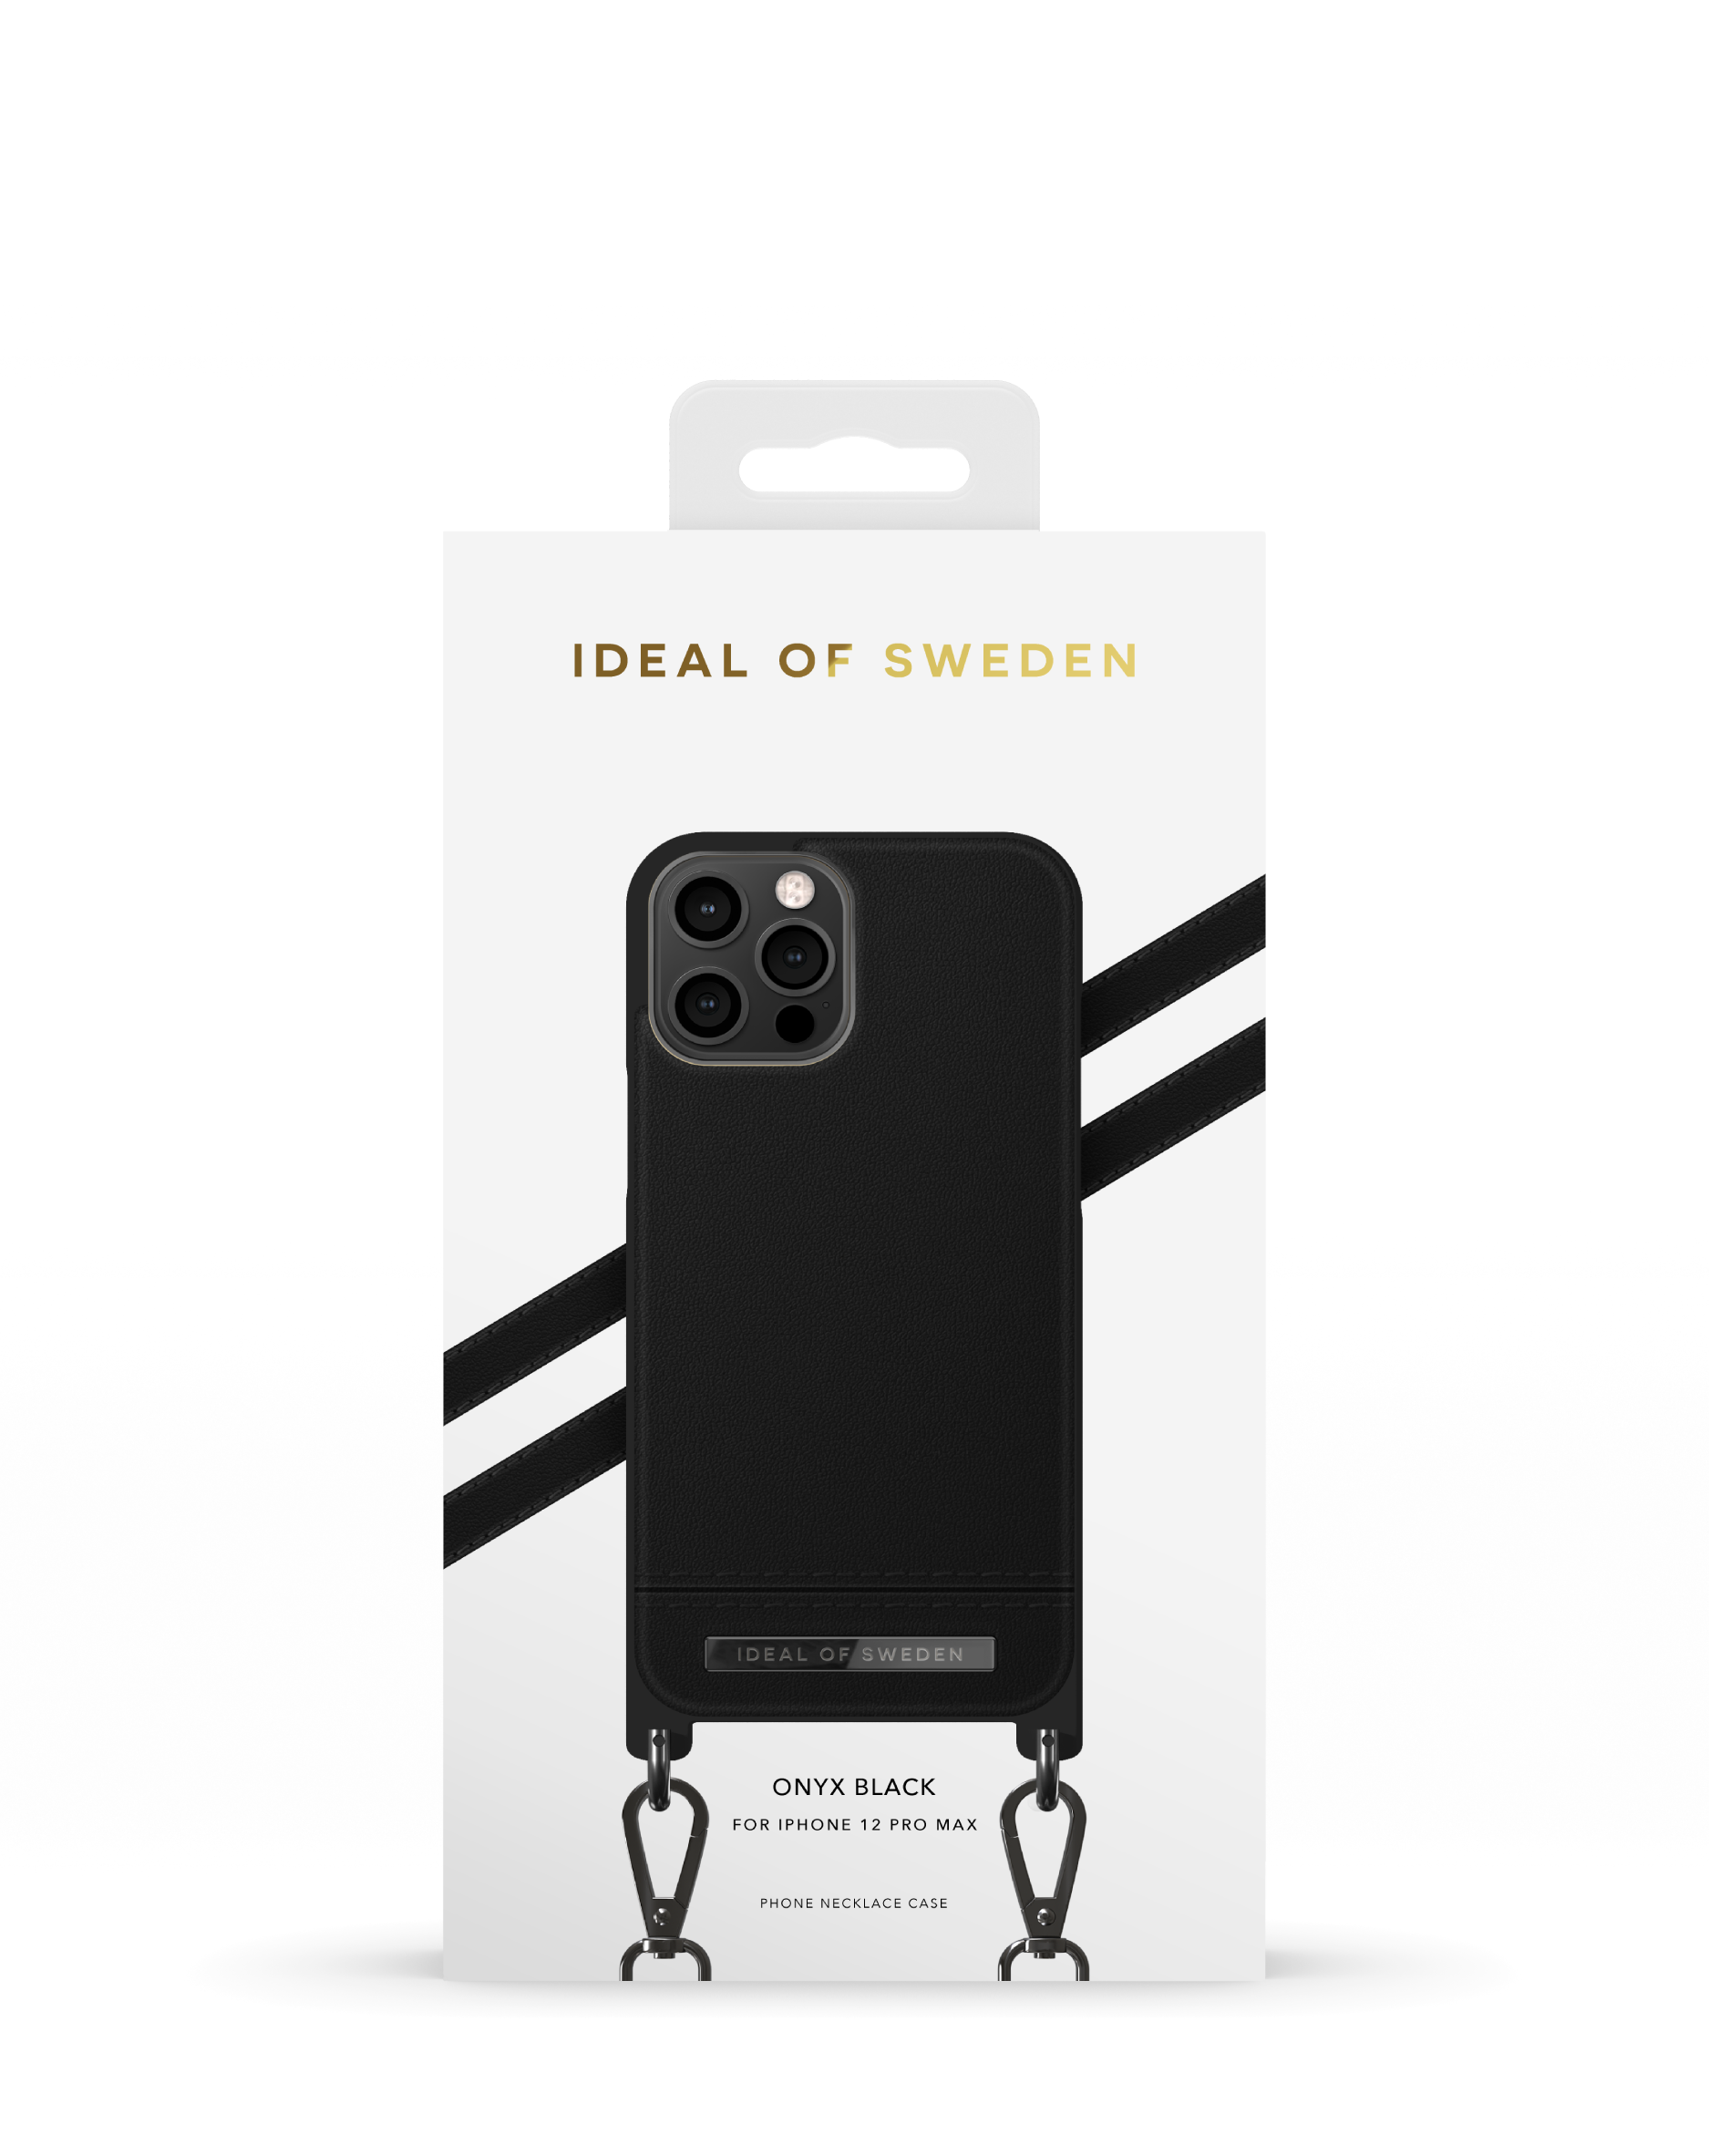 12 IDUWSS21-I2067, Apple, OF SWEDEN IDEAL Pro IPhone Bookcover, Black Onyx Max,